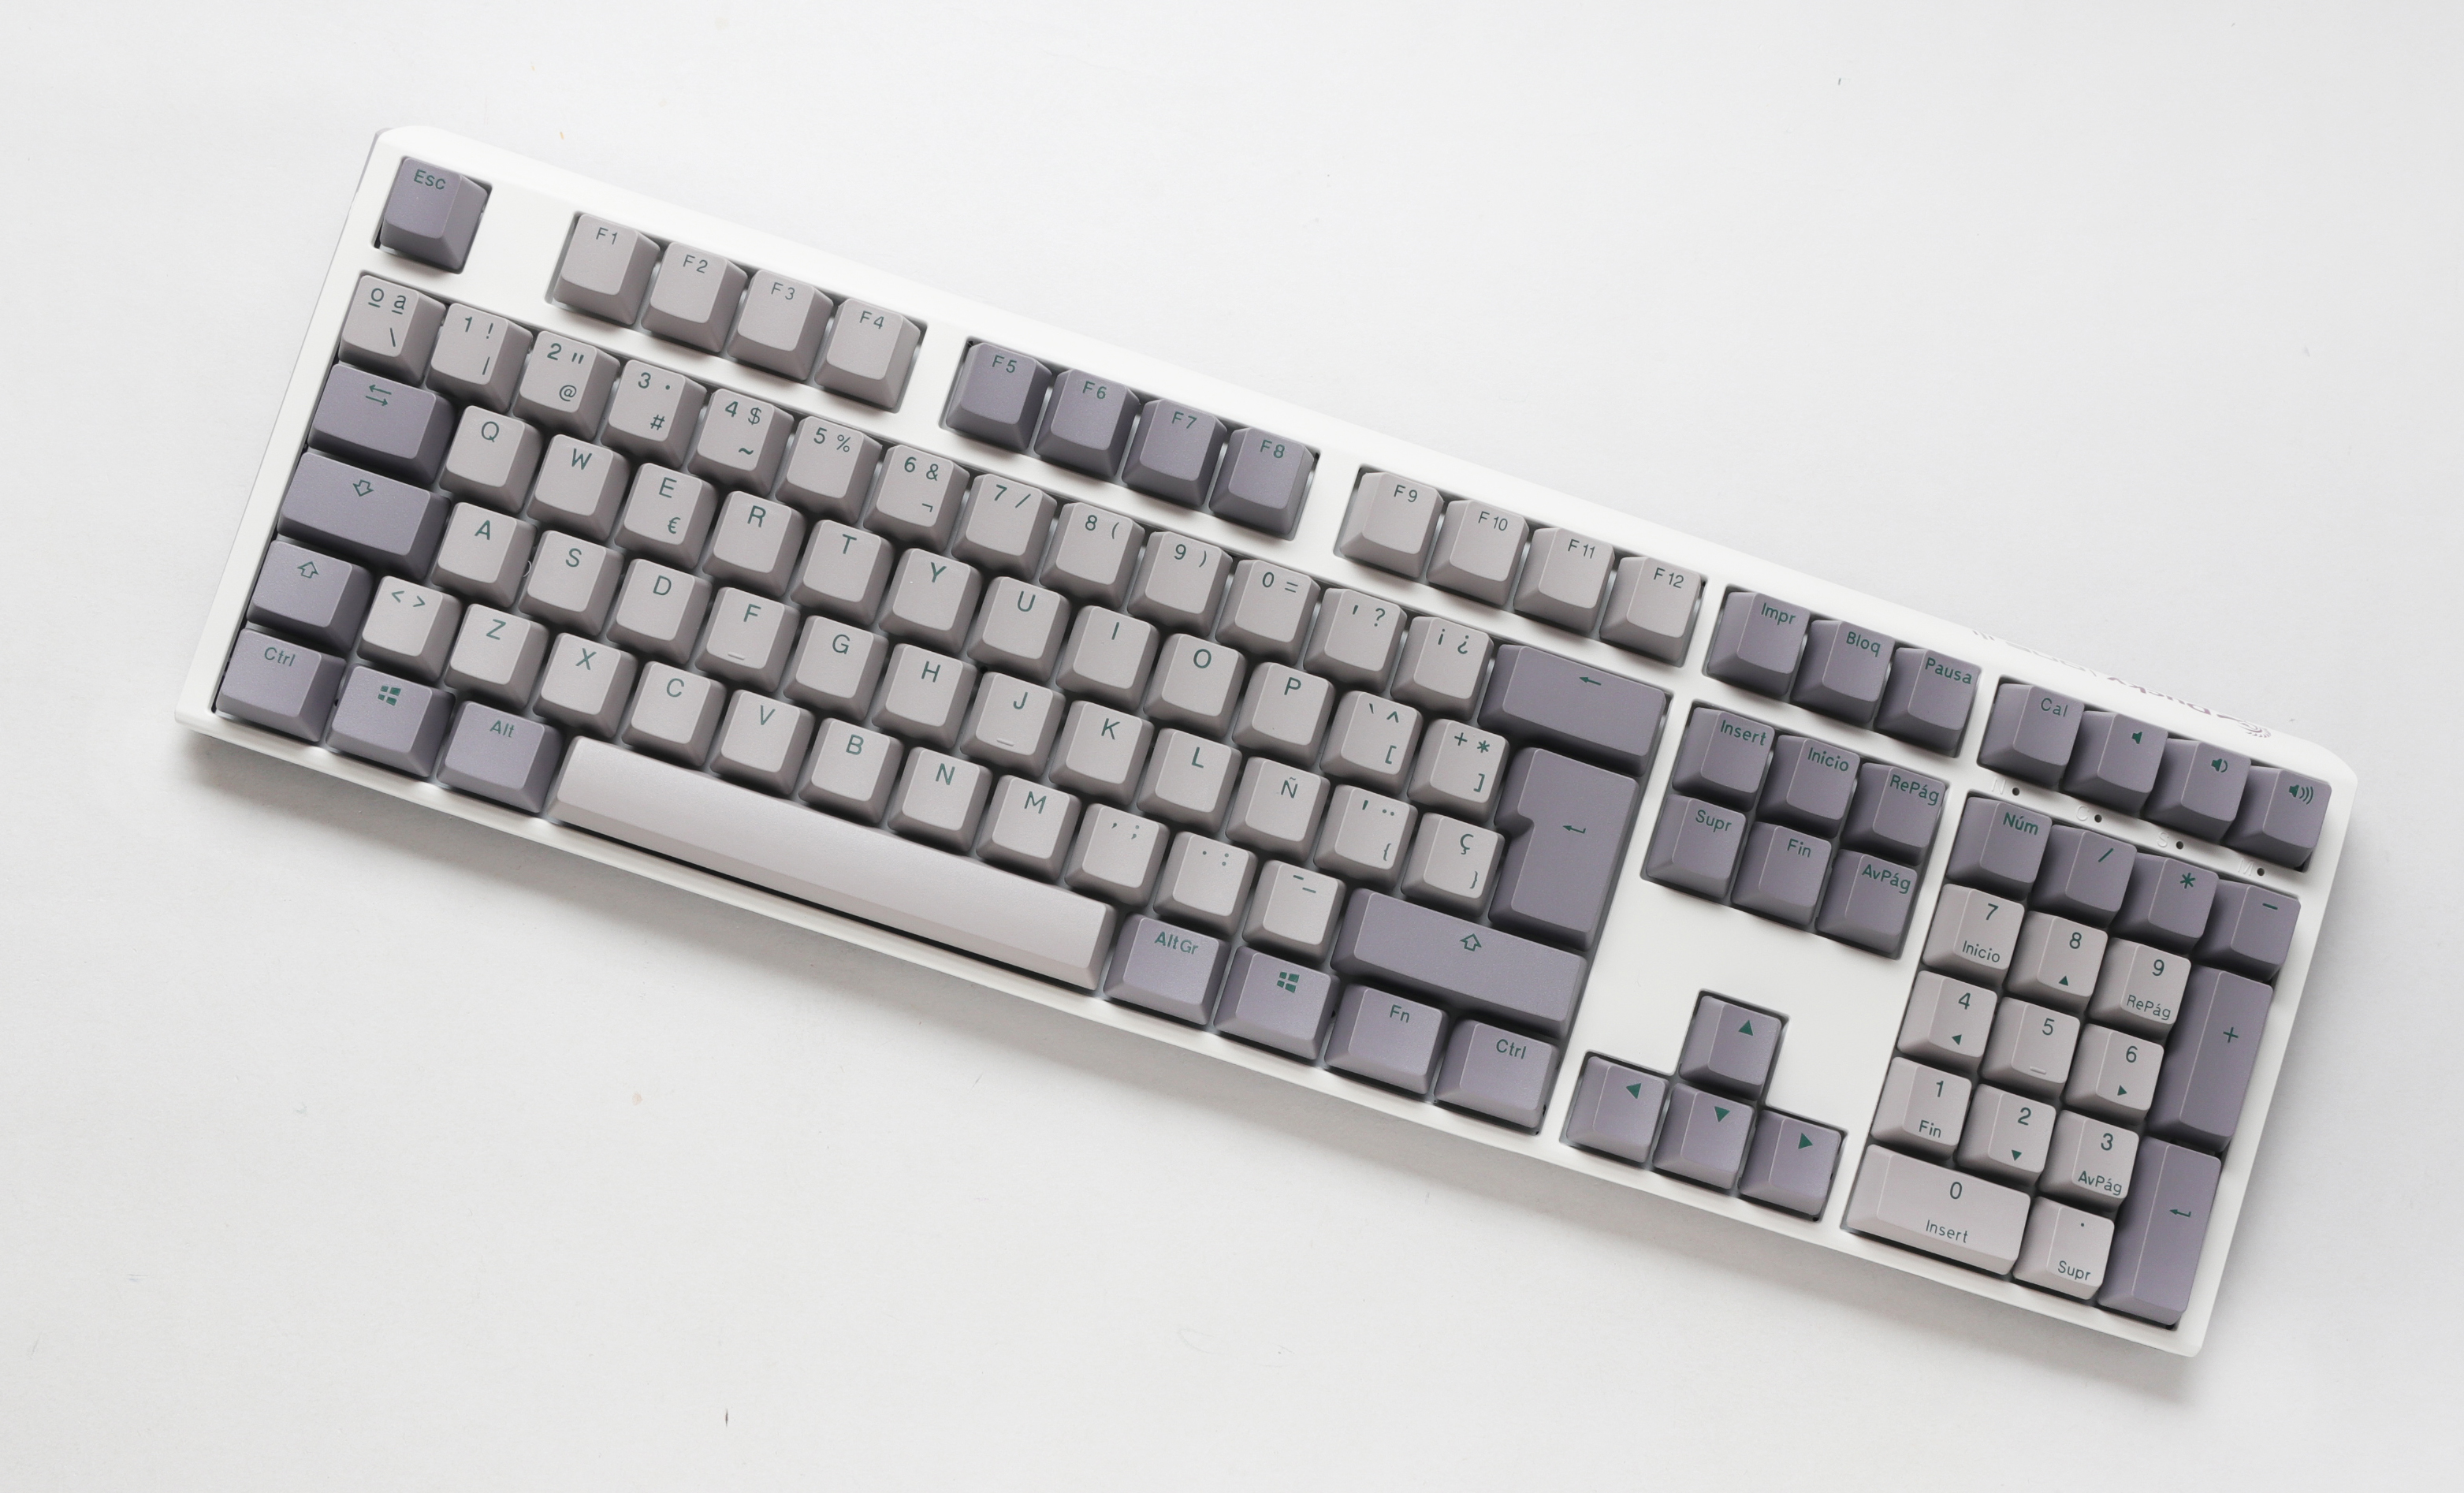 Teclado Ducky One 3 Mist Full-Size Hot-Swappable MX-Red PBT - Mecânico (ES)